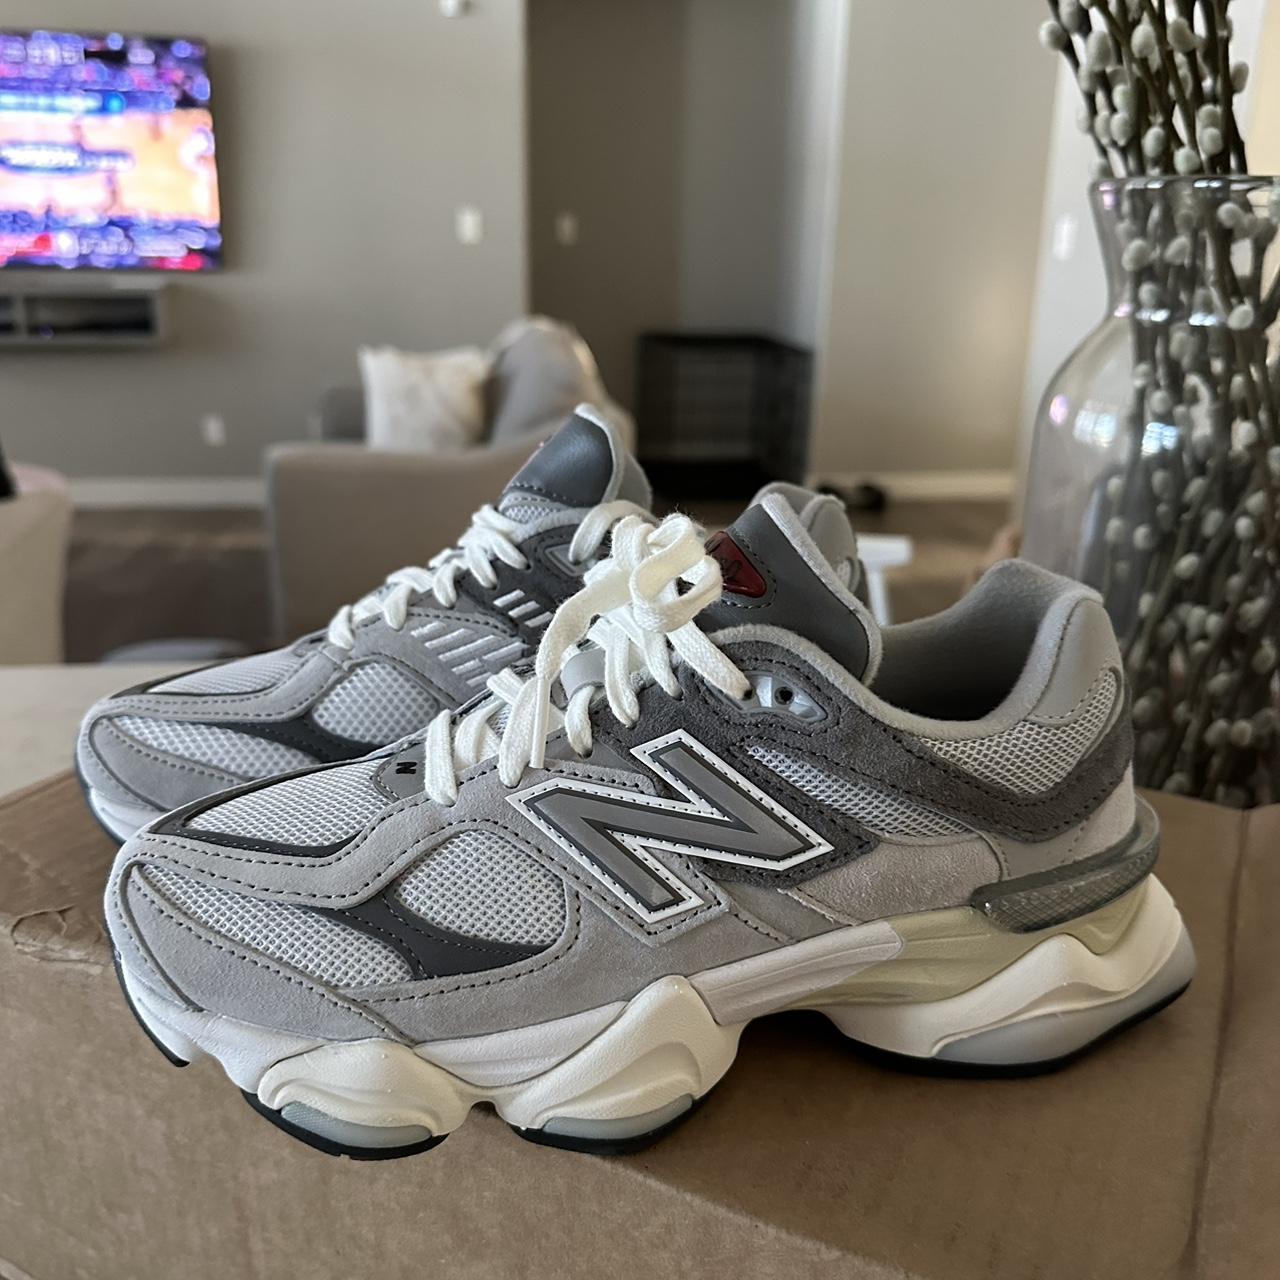 New Balance Women's Grey and White Trainers